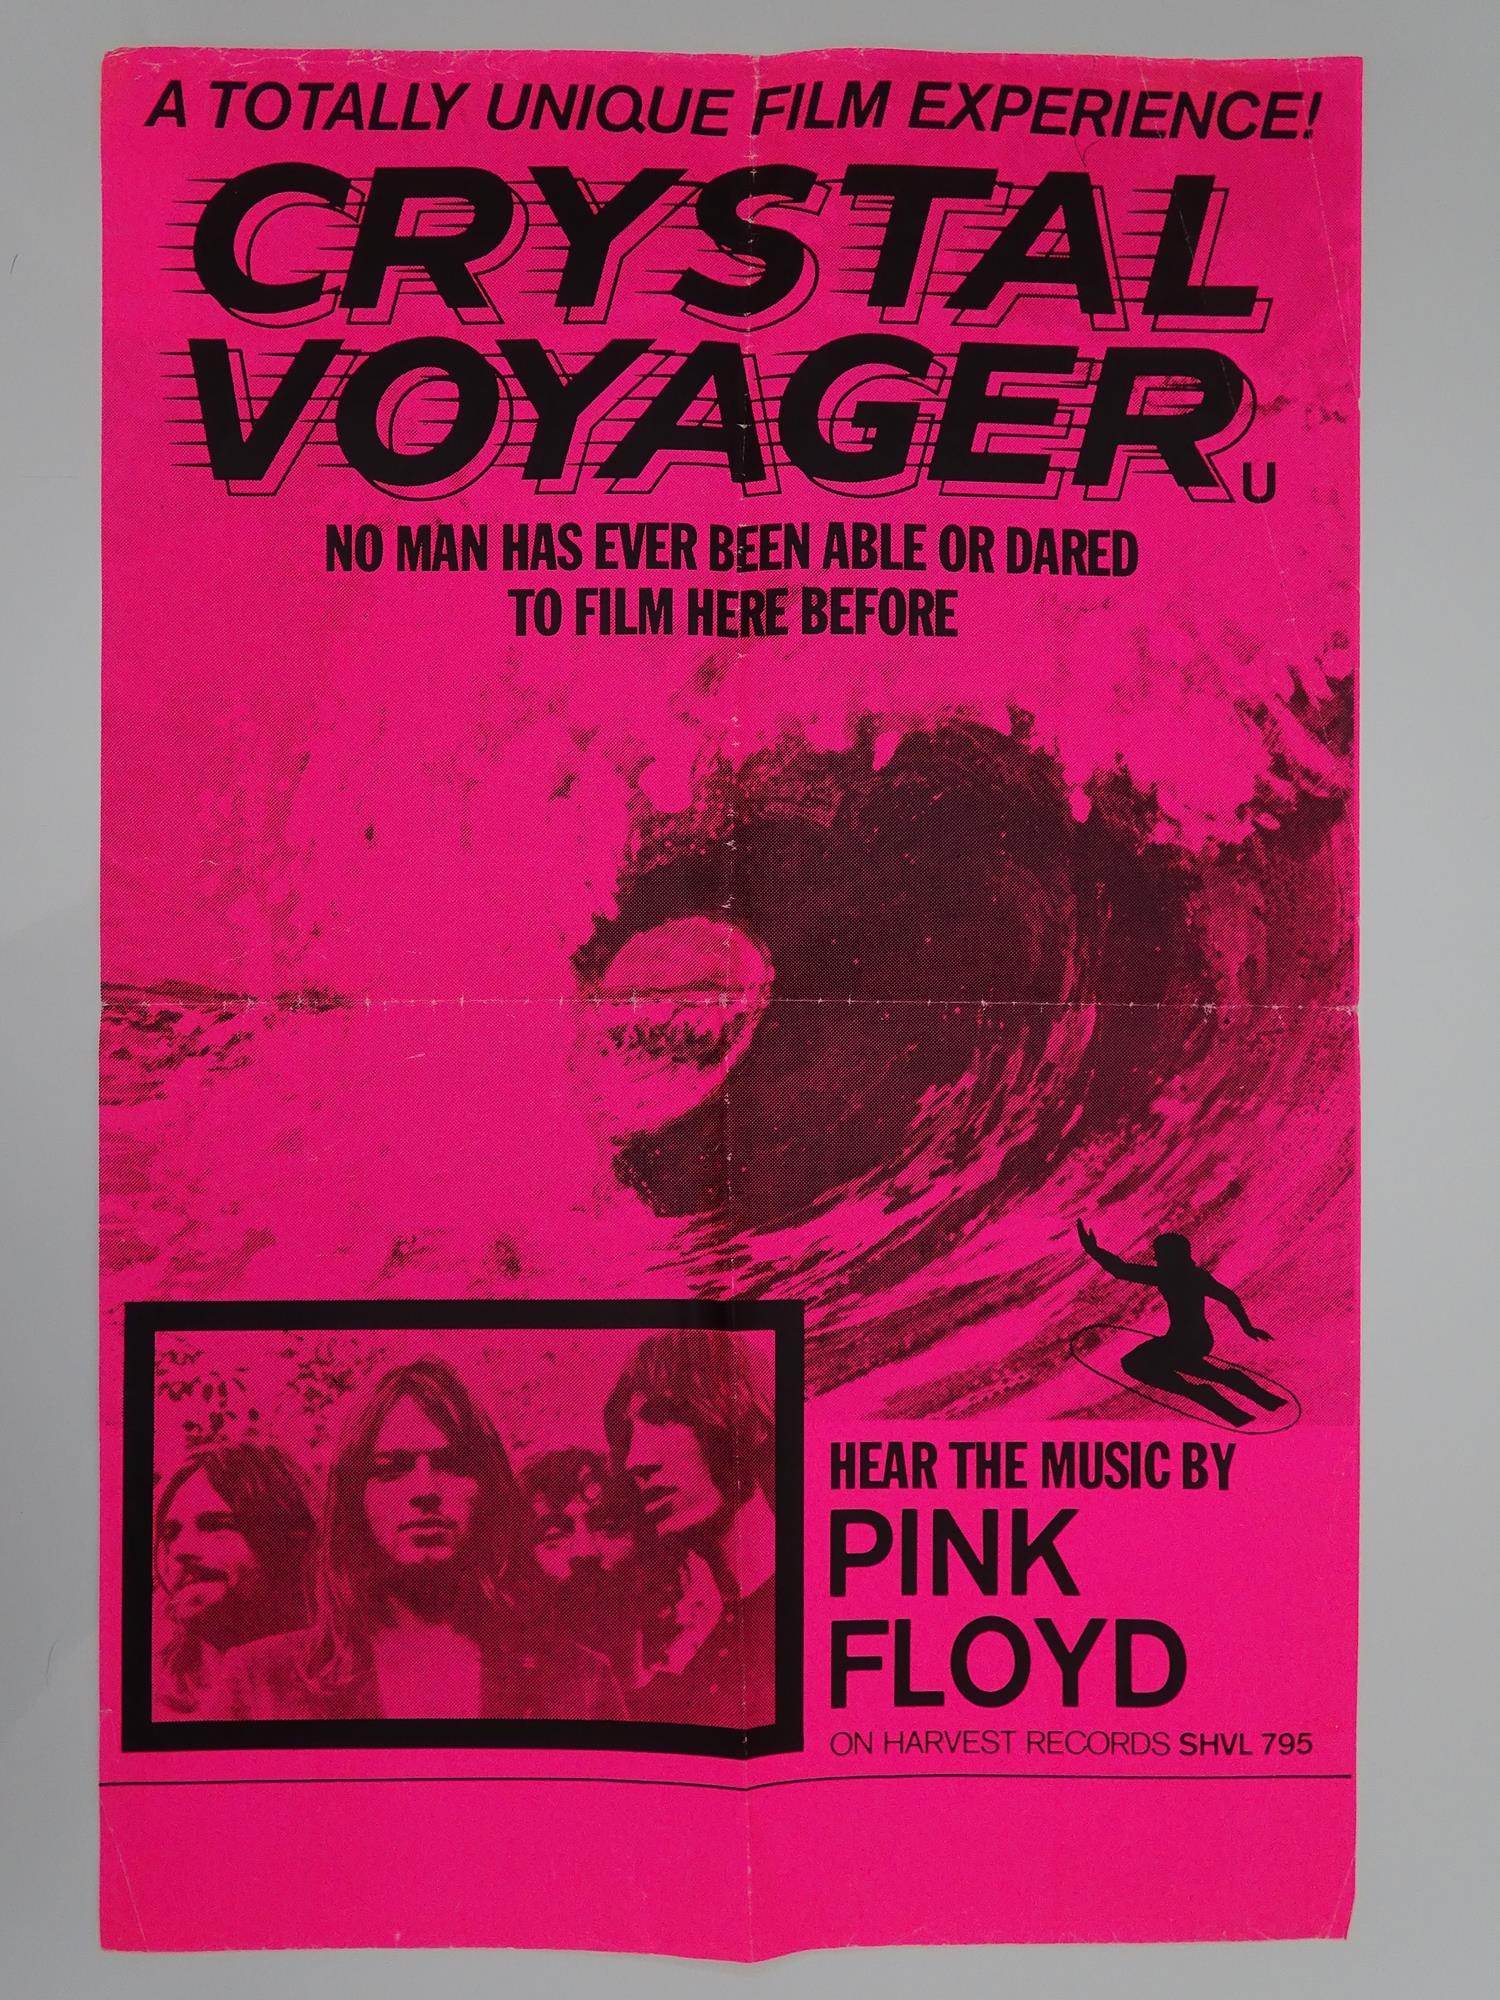 CRYSTAL VOYAGER' (1973) music by PINK FLOYD - British Double Crown (20" x 30" - 51 x 76 cm) -